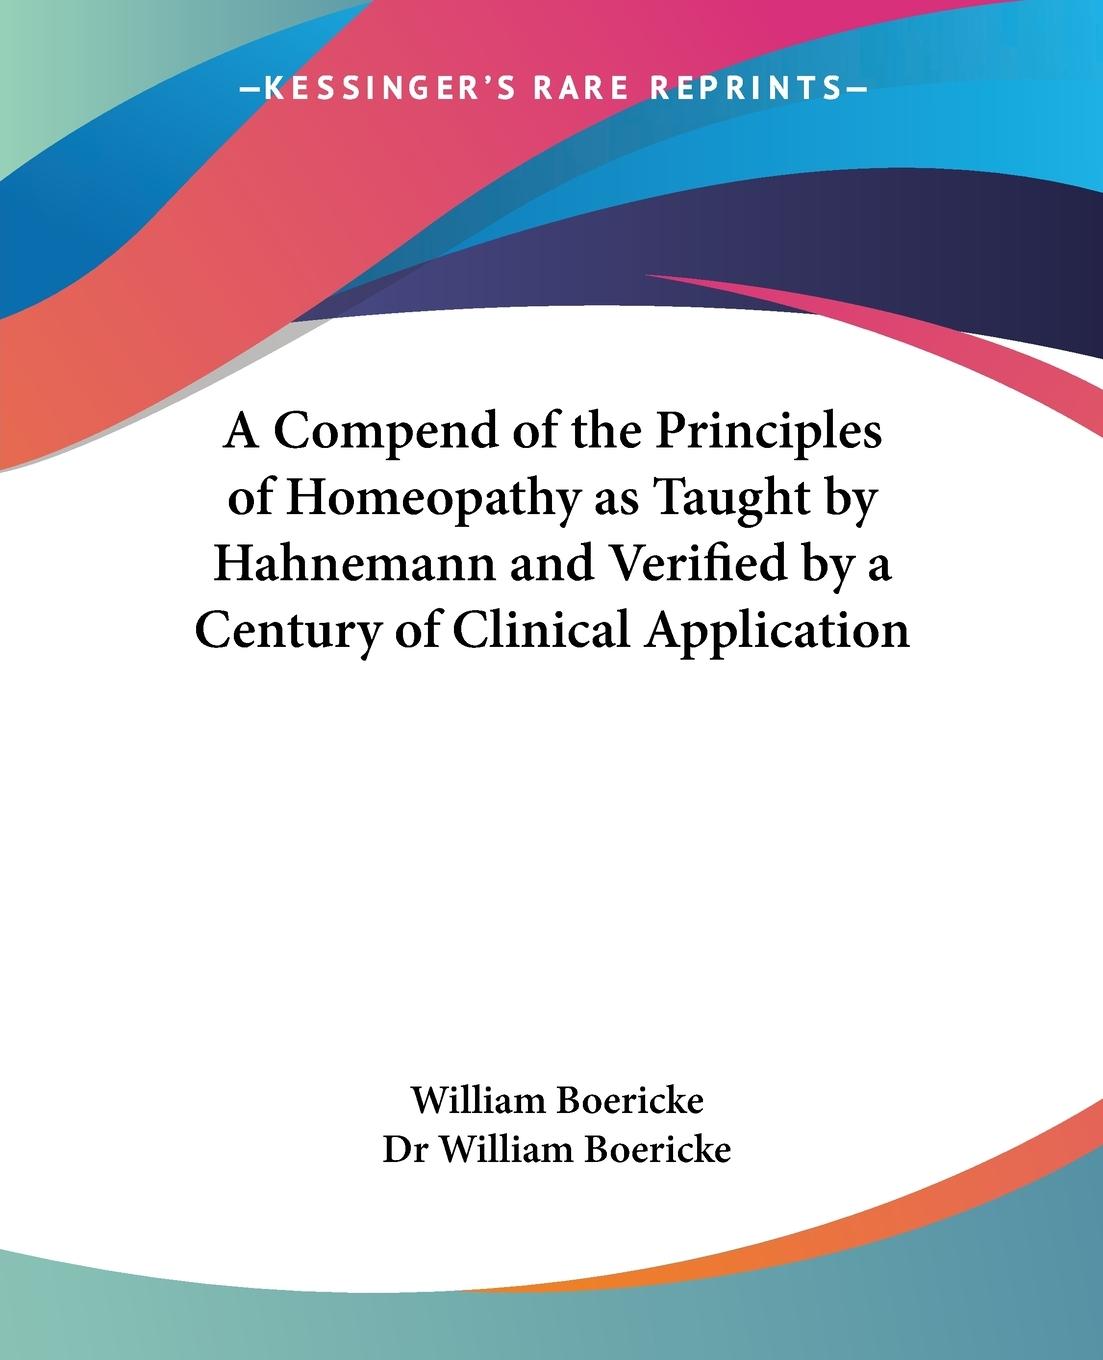 A Compend of the Principles of Homeopathy as Taught by Hahnemann and Verified by a Century of Clinical Application - Boericke, William Boericke, William